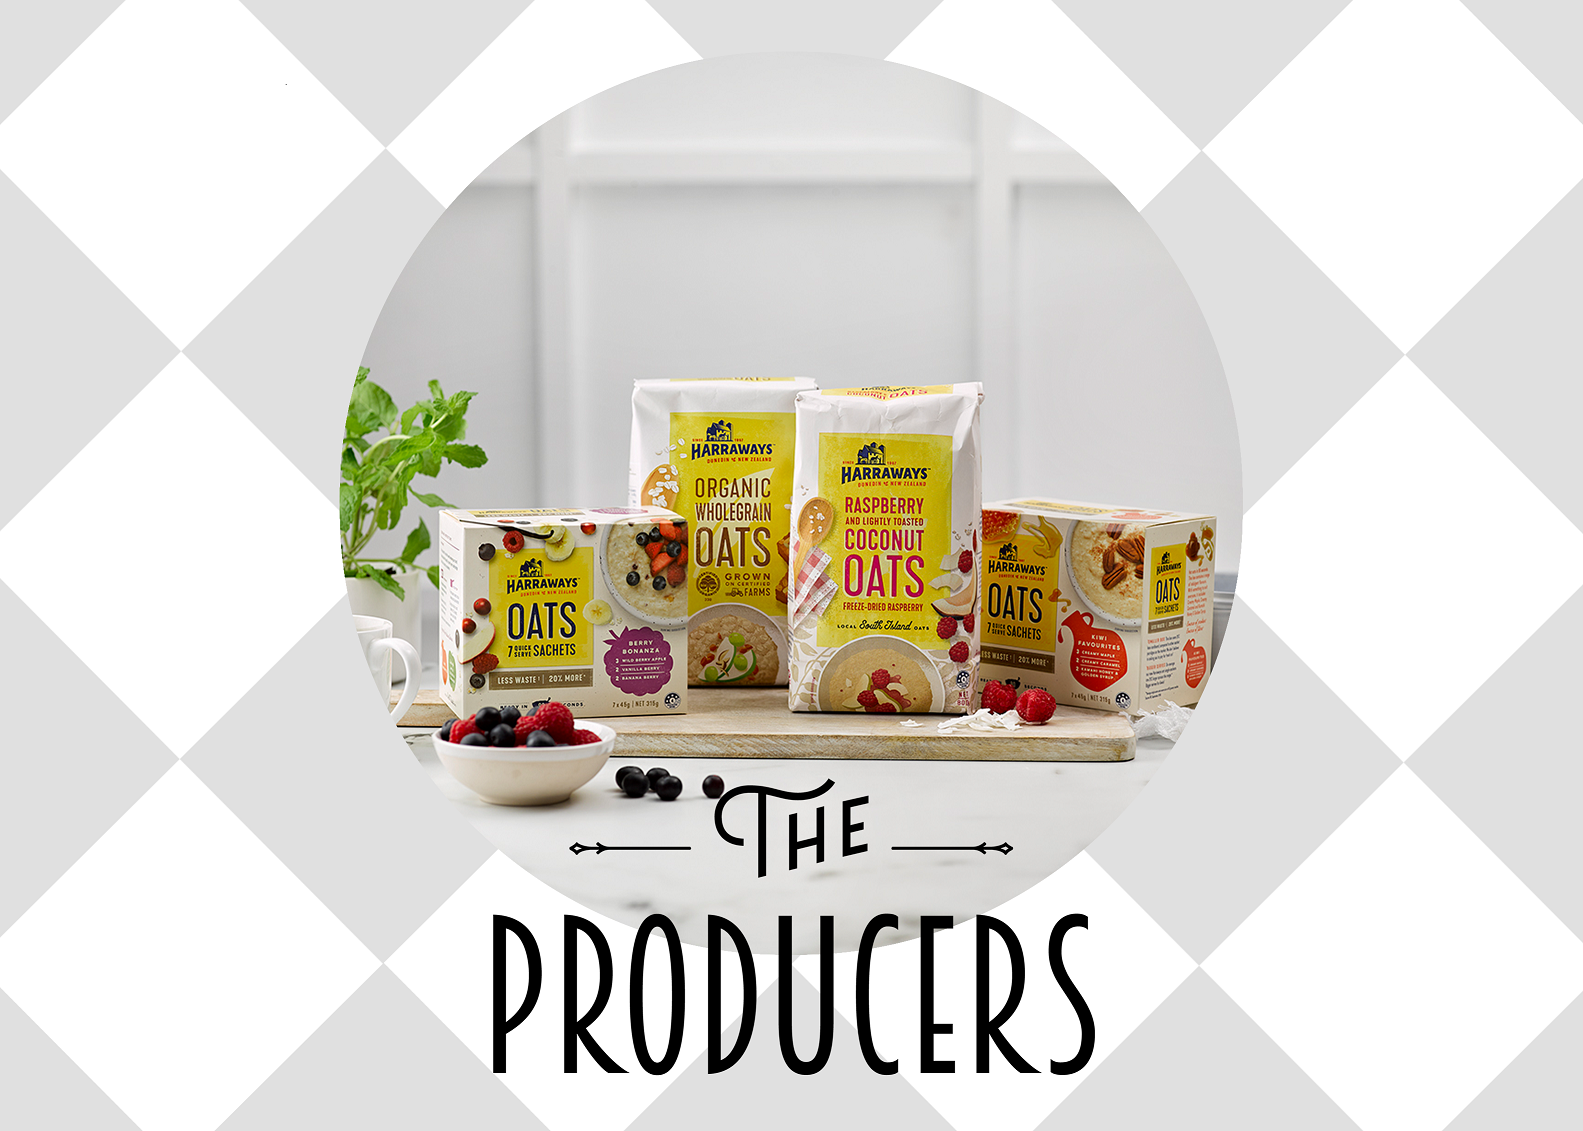 A variety of Harraways products with text "The Producers" at the bottom